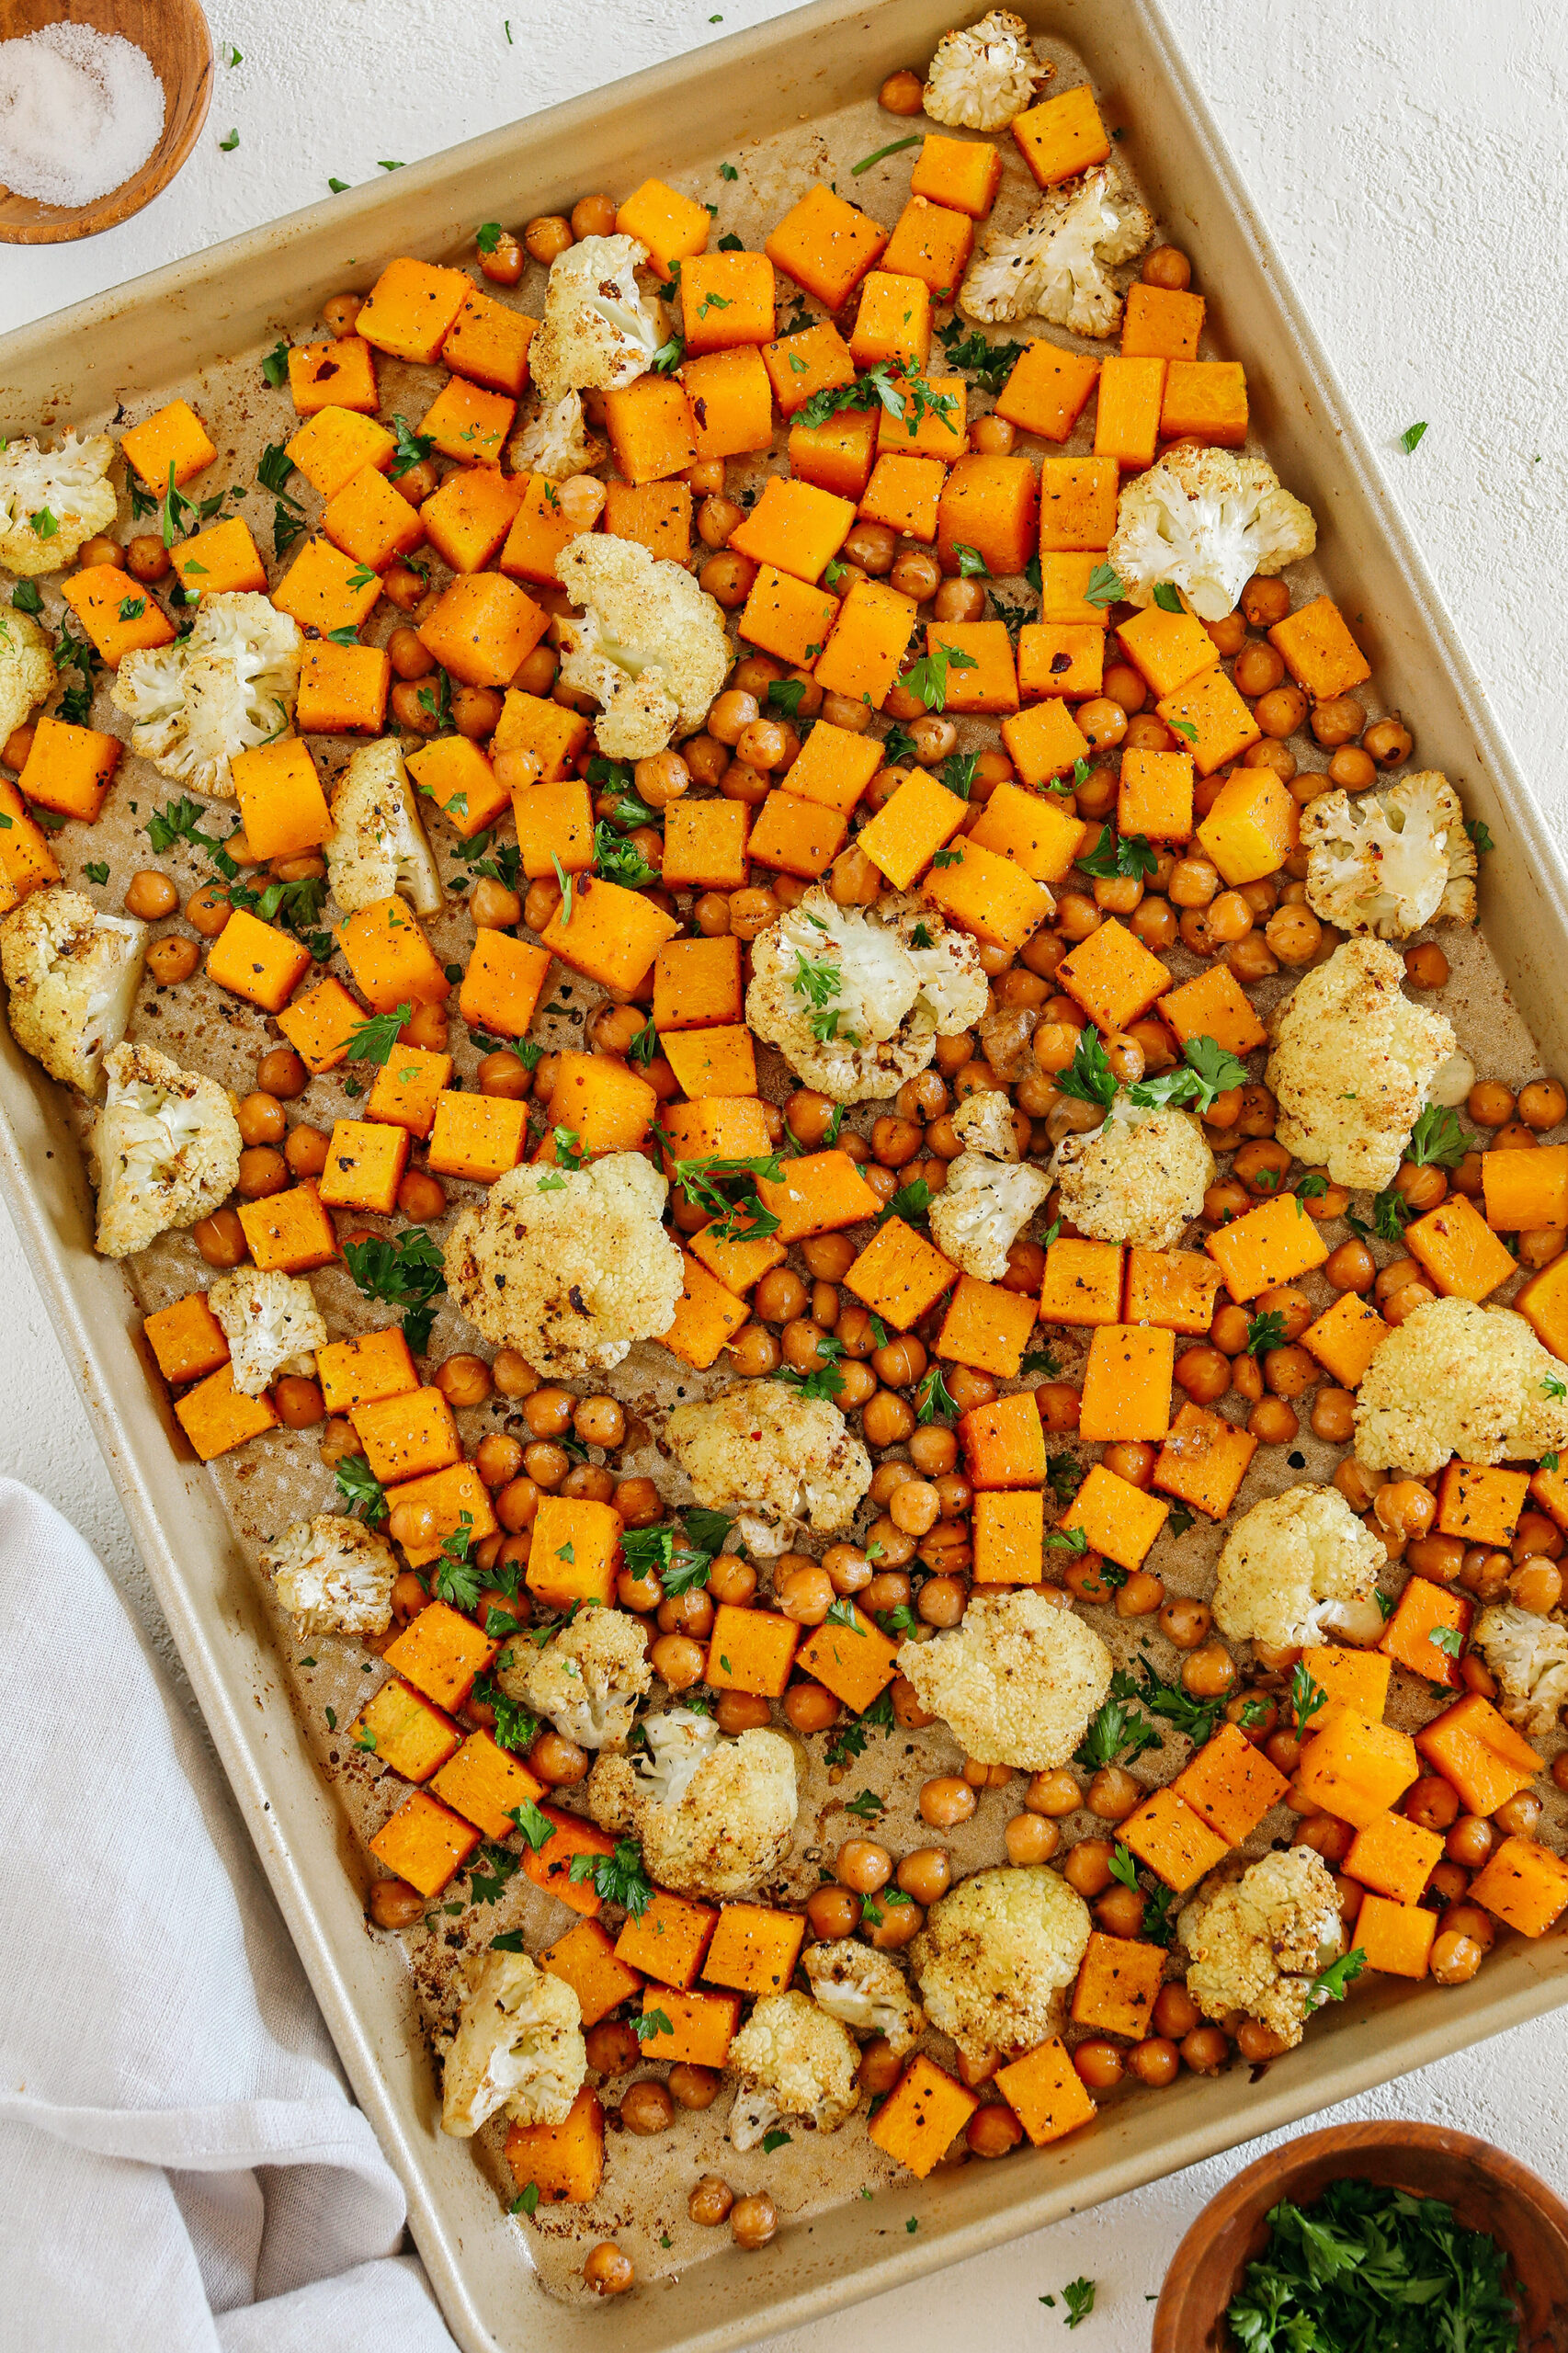 Roasted Squash, Cauliflower and Chickpeas that are perfectly seasoned and cooked all on one sheet pan for an easy and delicious healthy side dish the whole family will love!